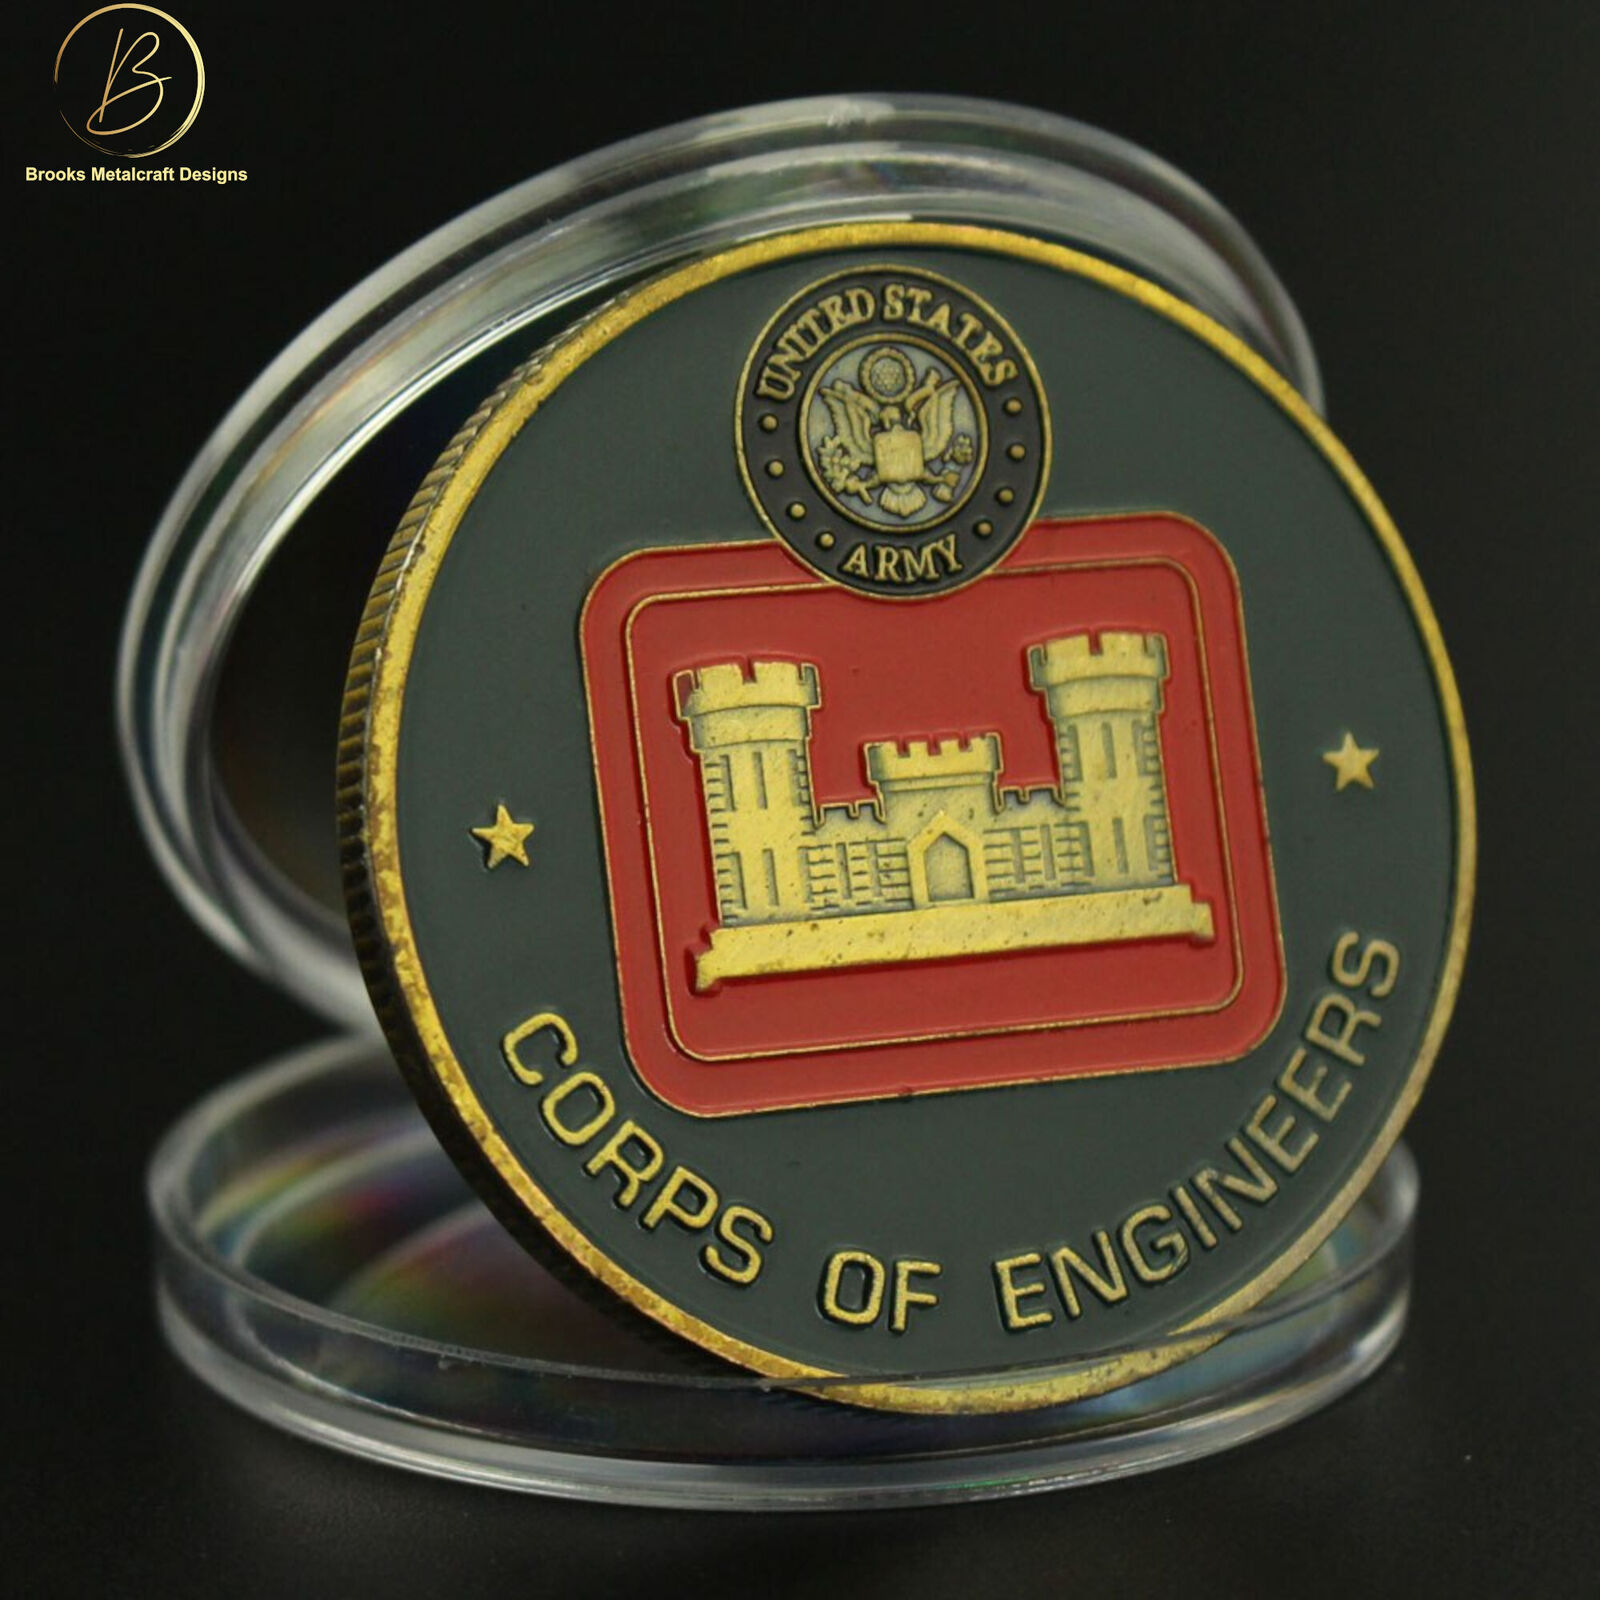 Army Corps of Engineers Challenge Coin